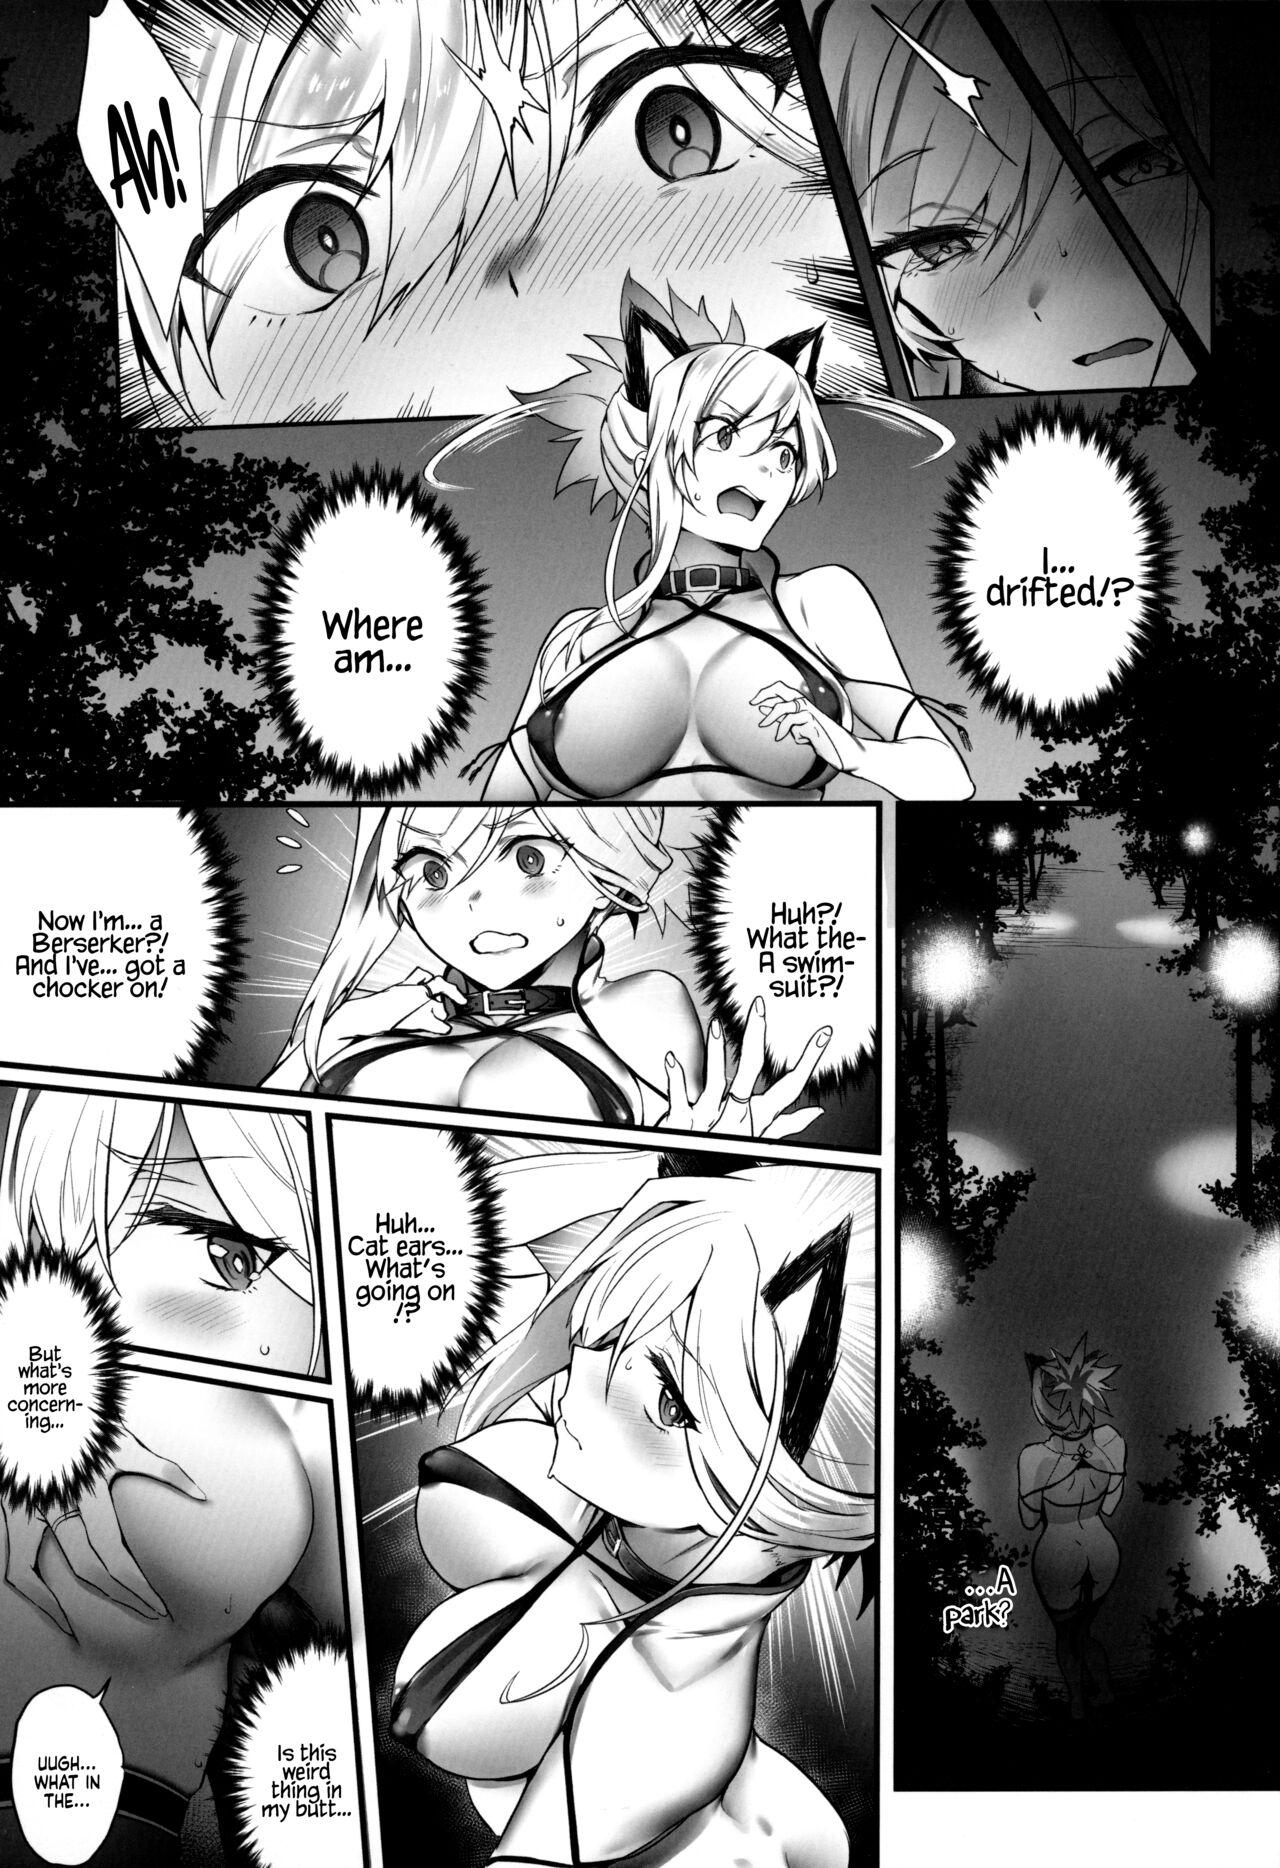 Tranny Sex Master no Benki wa kono Musashi | Master’s Cumdump is the One and Only Musashi - Fate grand order Family Sex - Page 3